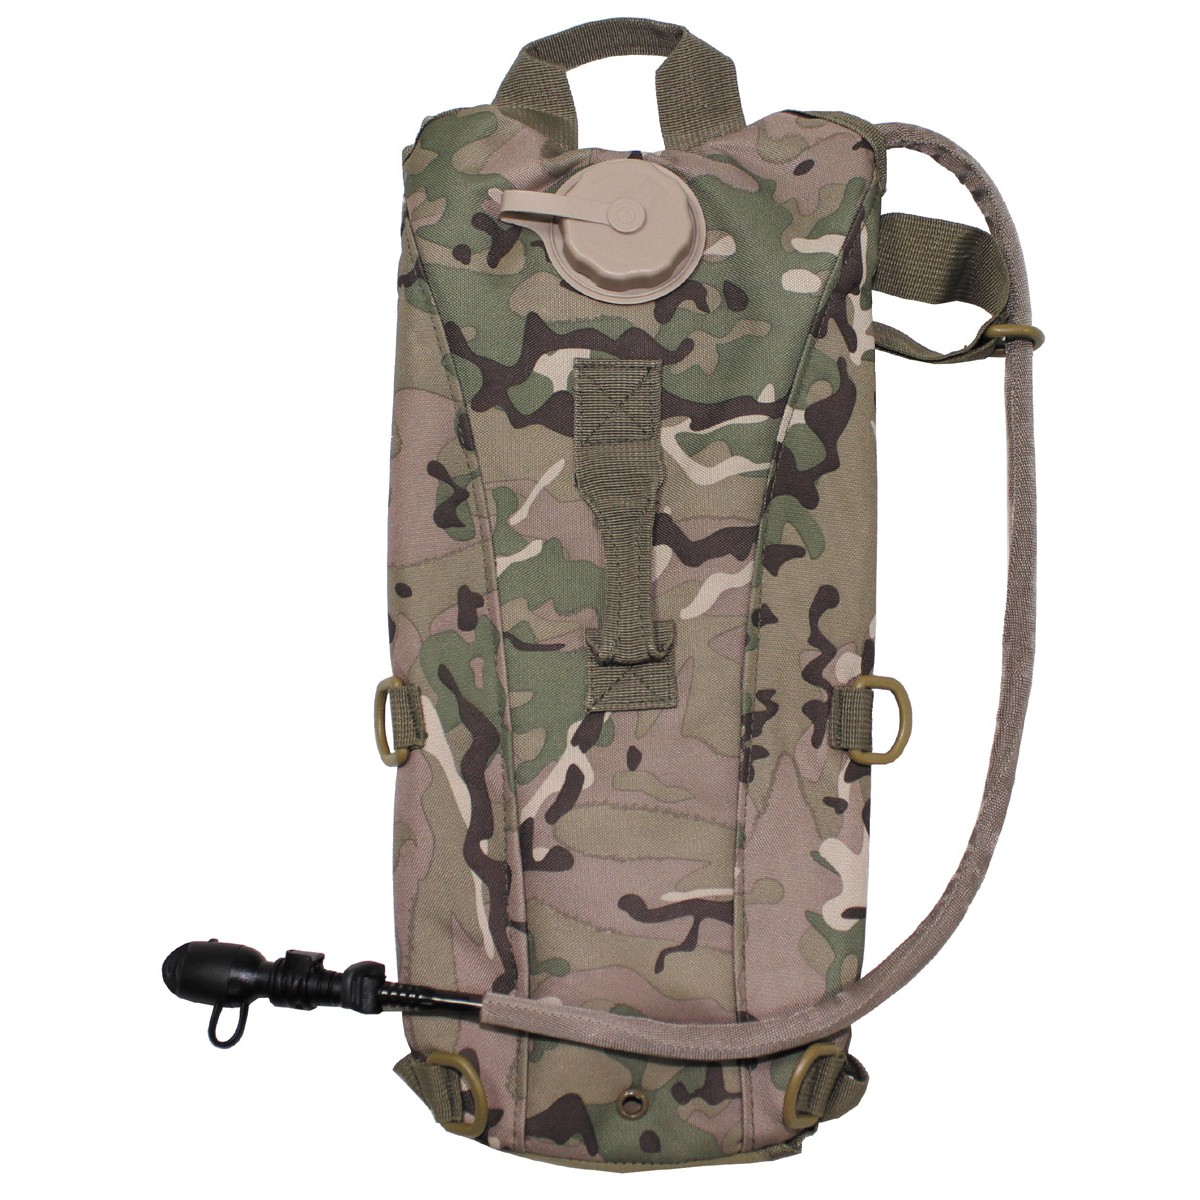 Tactical Military Hydration Backpack "EXTREME" w/ bladder TPU - Multicam